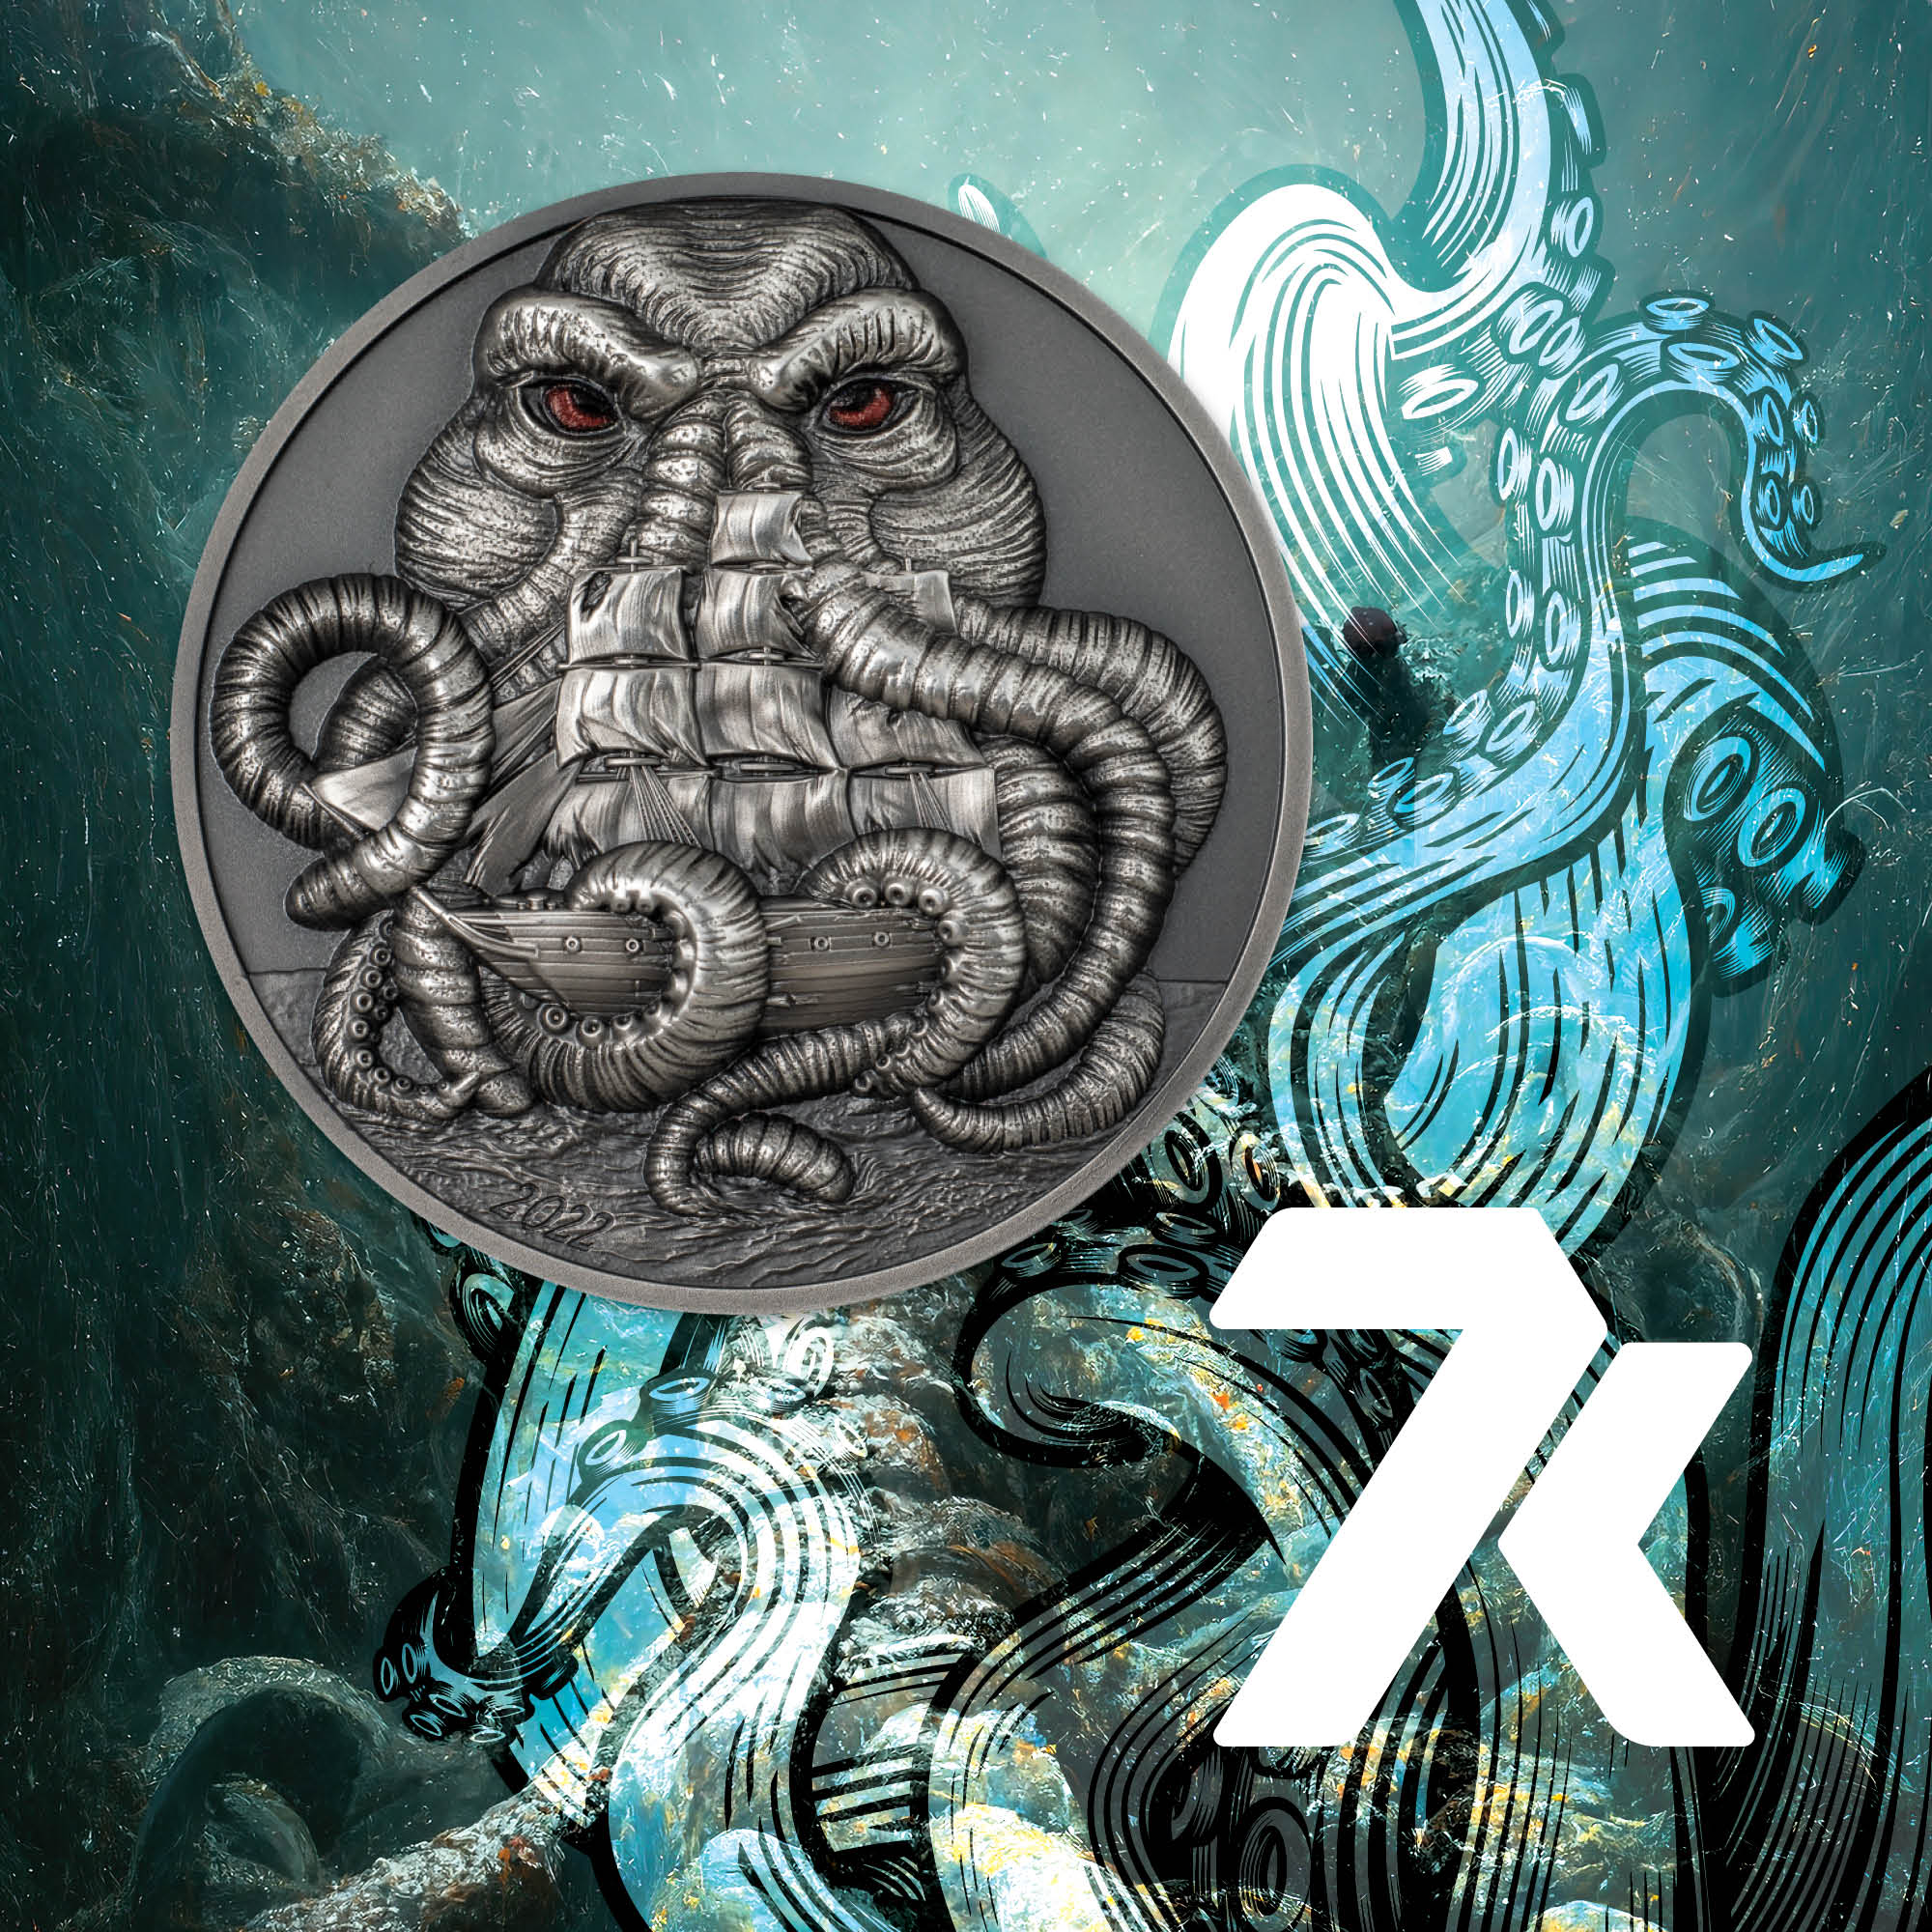 2022 H.P Lovecraft Cthulhu 3 oz Silver Coin